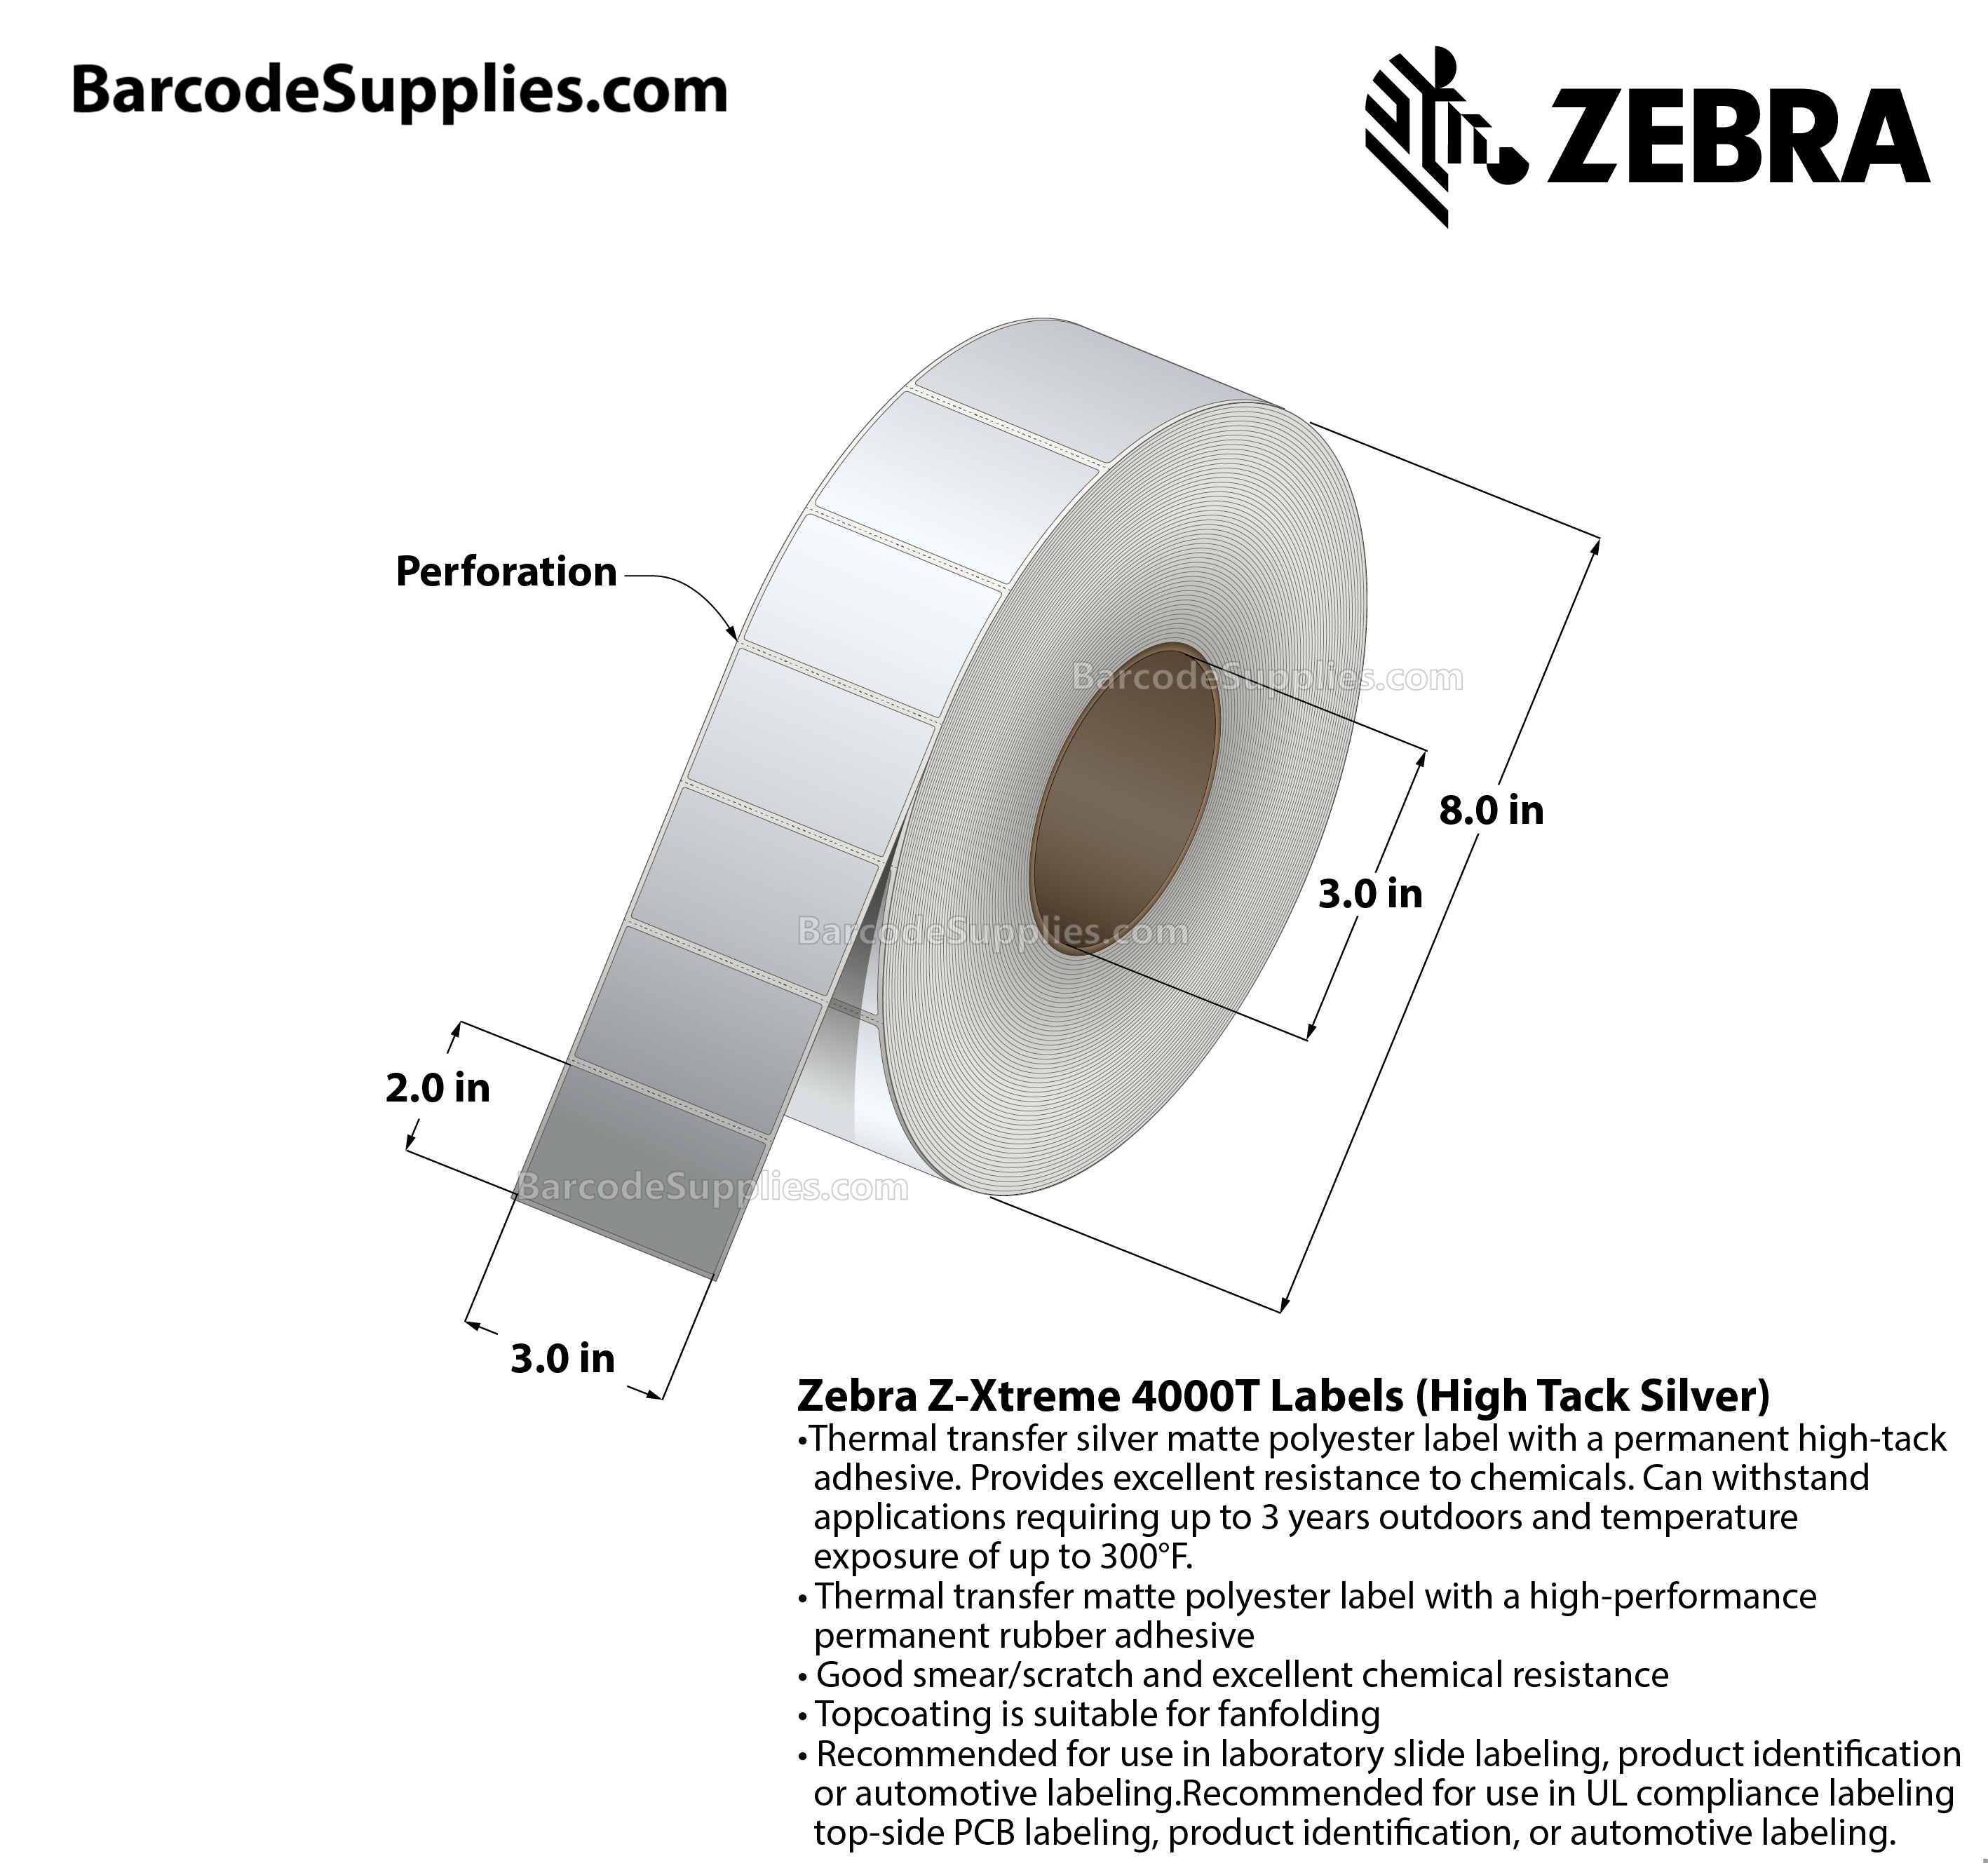 3 x 2 Thermal Transfer Silver Z-Xtreme 4000T High-Tack Silver Labels With High-tack Adhesive - Perforated - 1000 Labels Per Roll - Carton Of 1 Rolls - 1000 Labels Total - MPN: 10023180